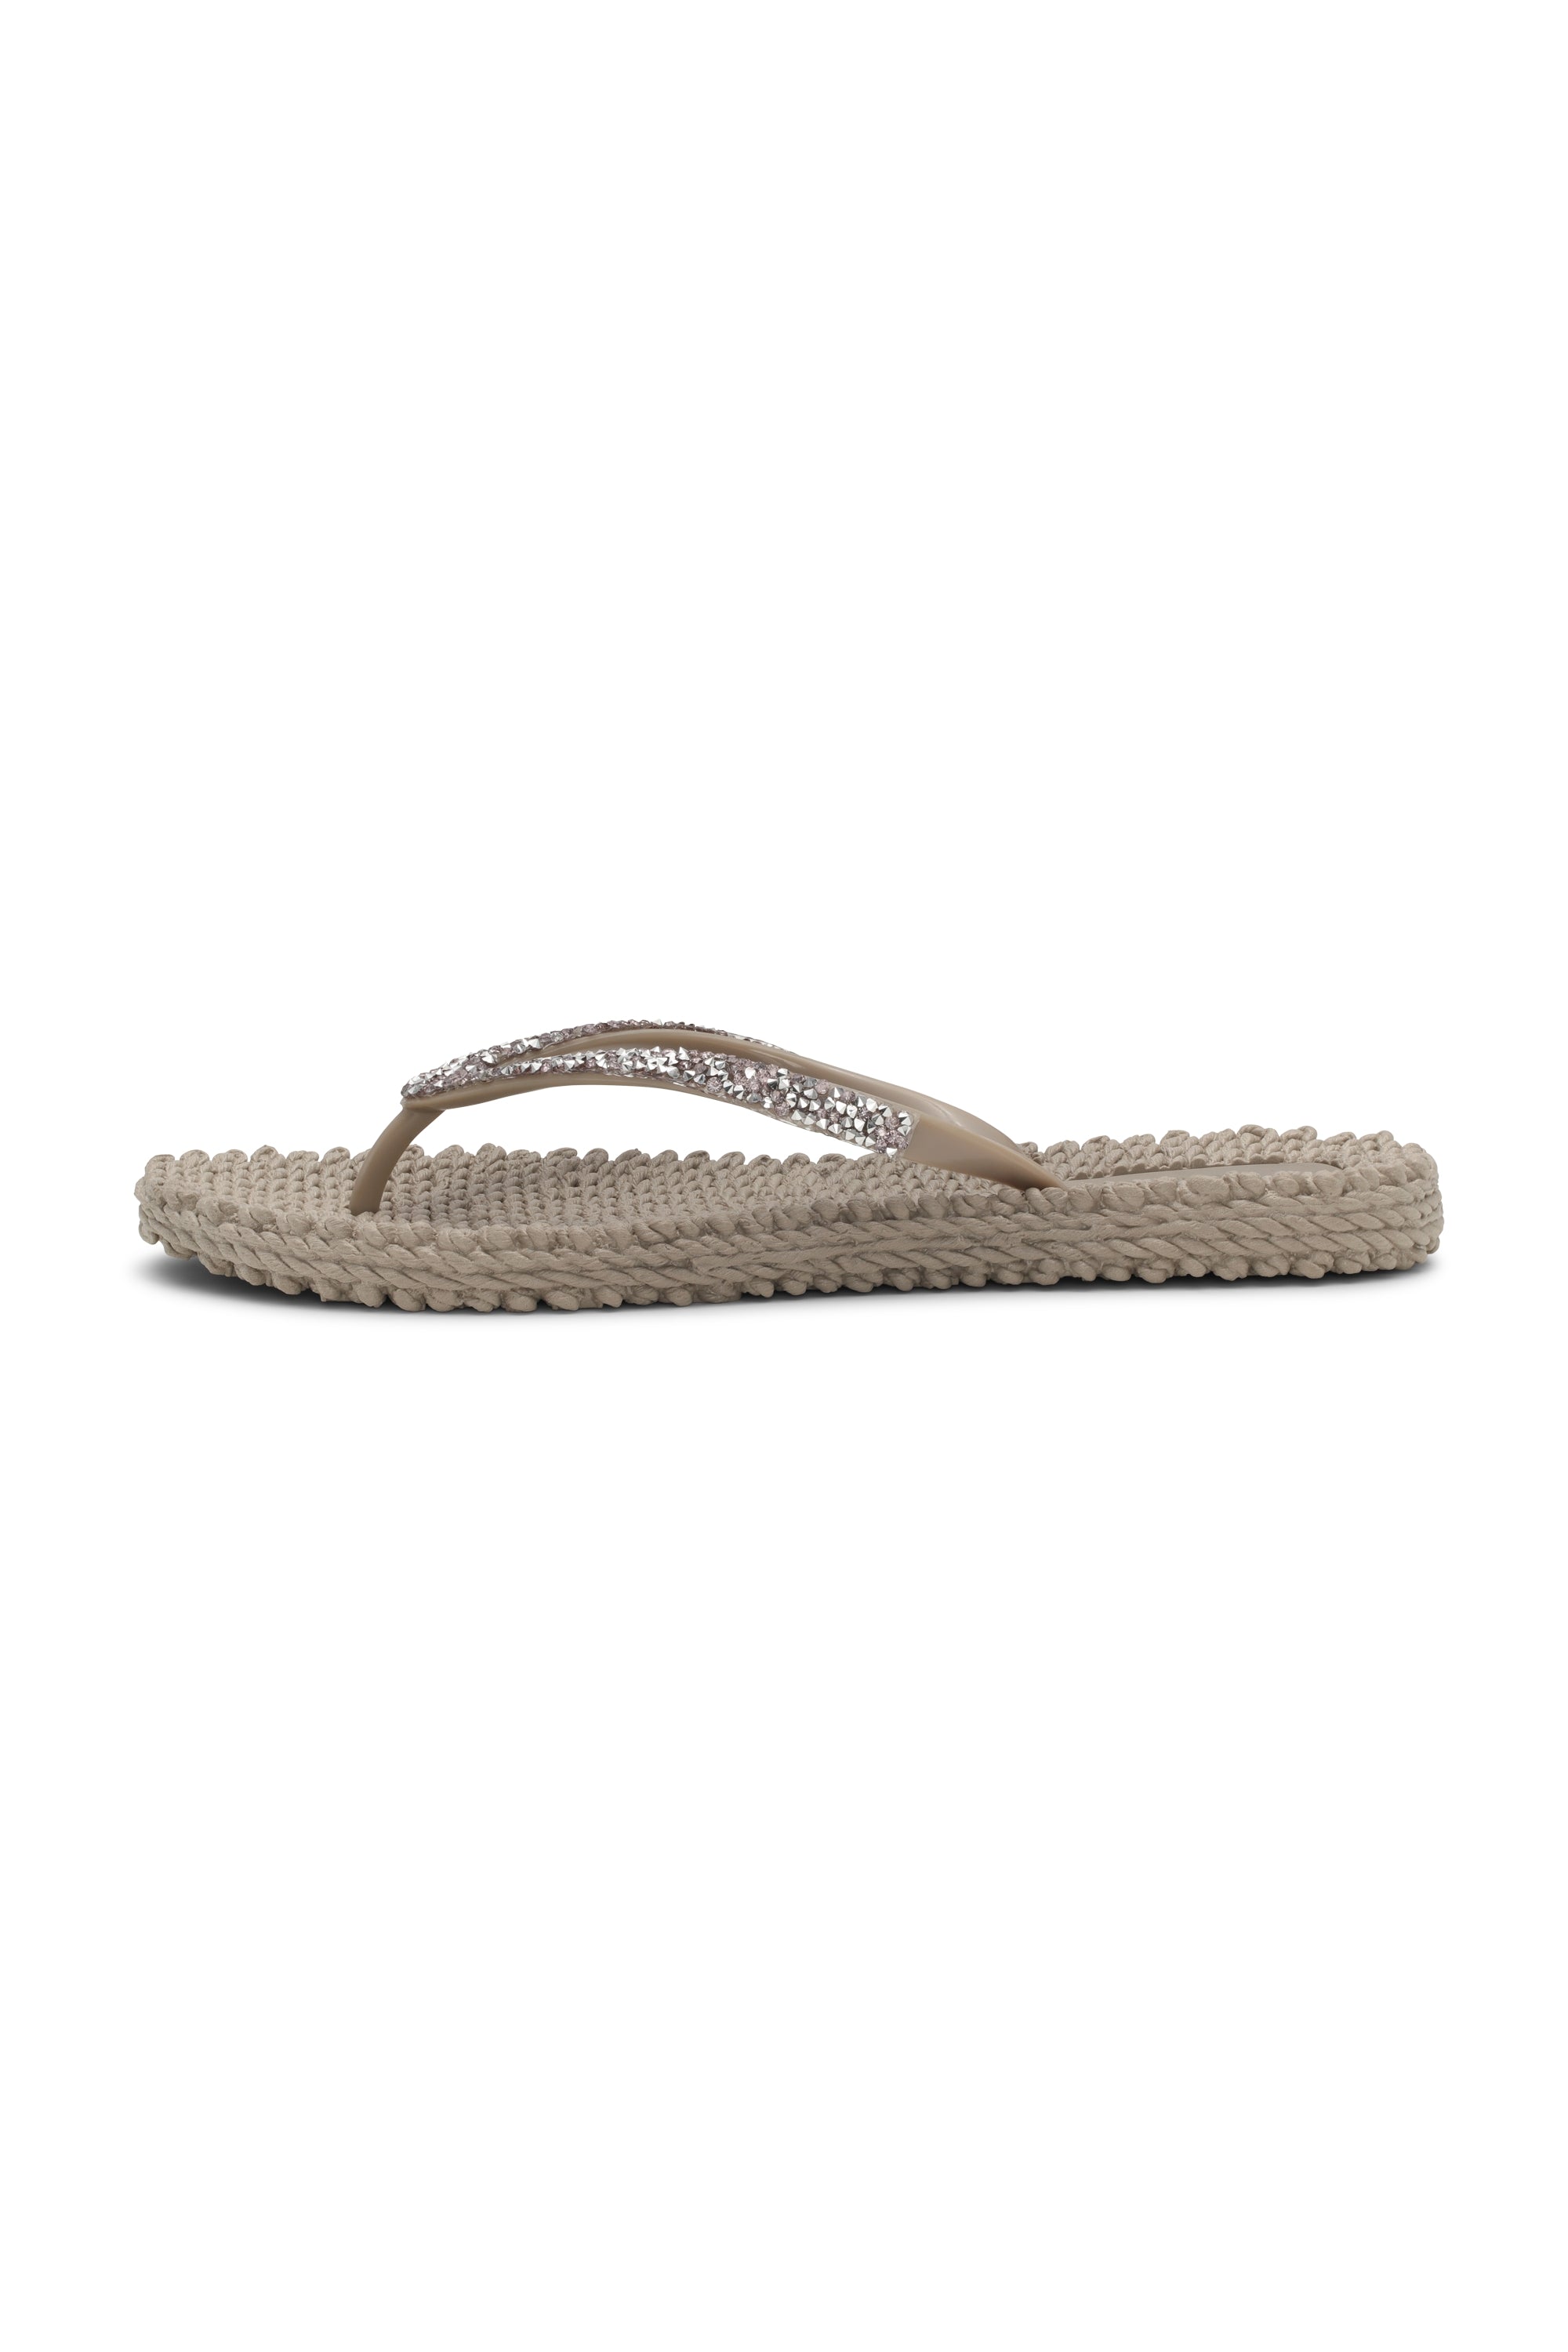 Flip Flop in color taupe with glitter strips by Ilse Jacobsen